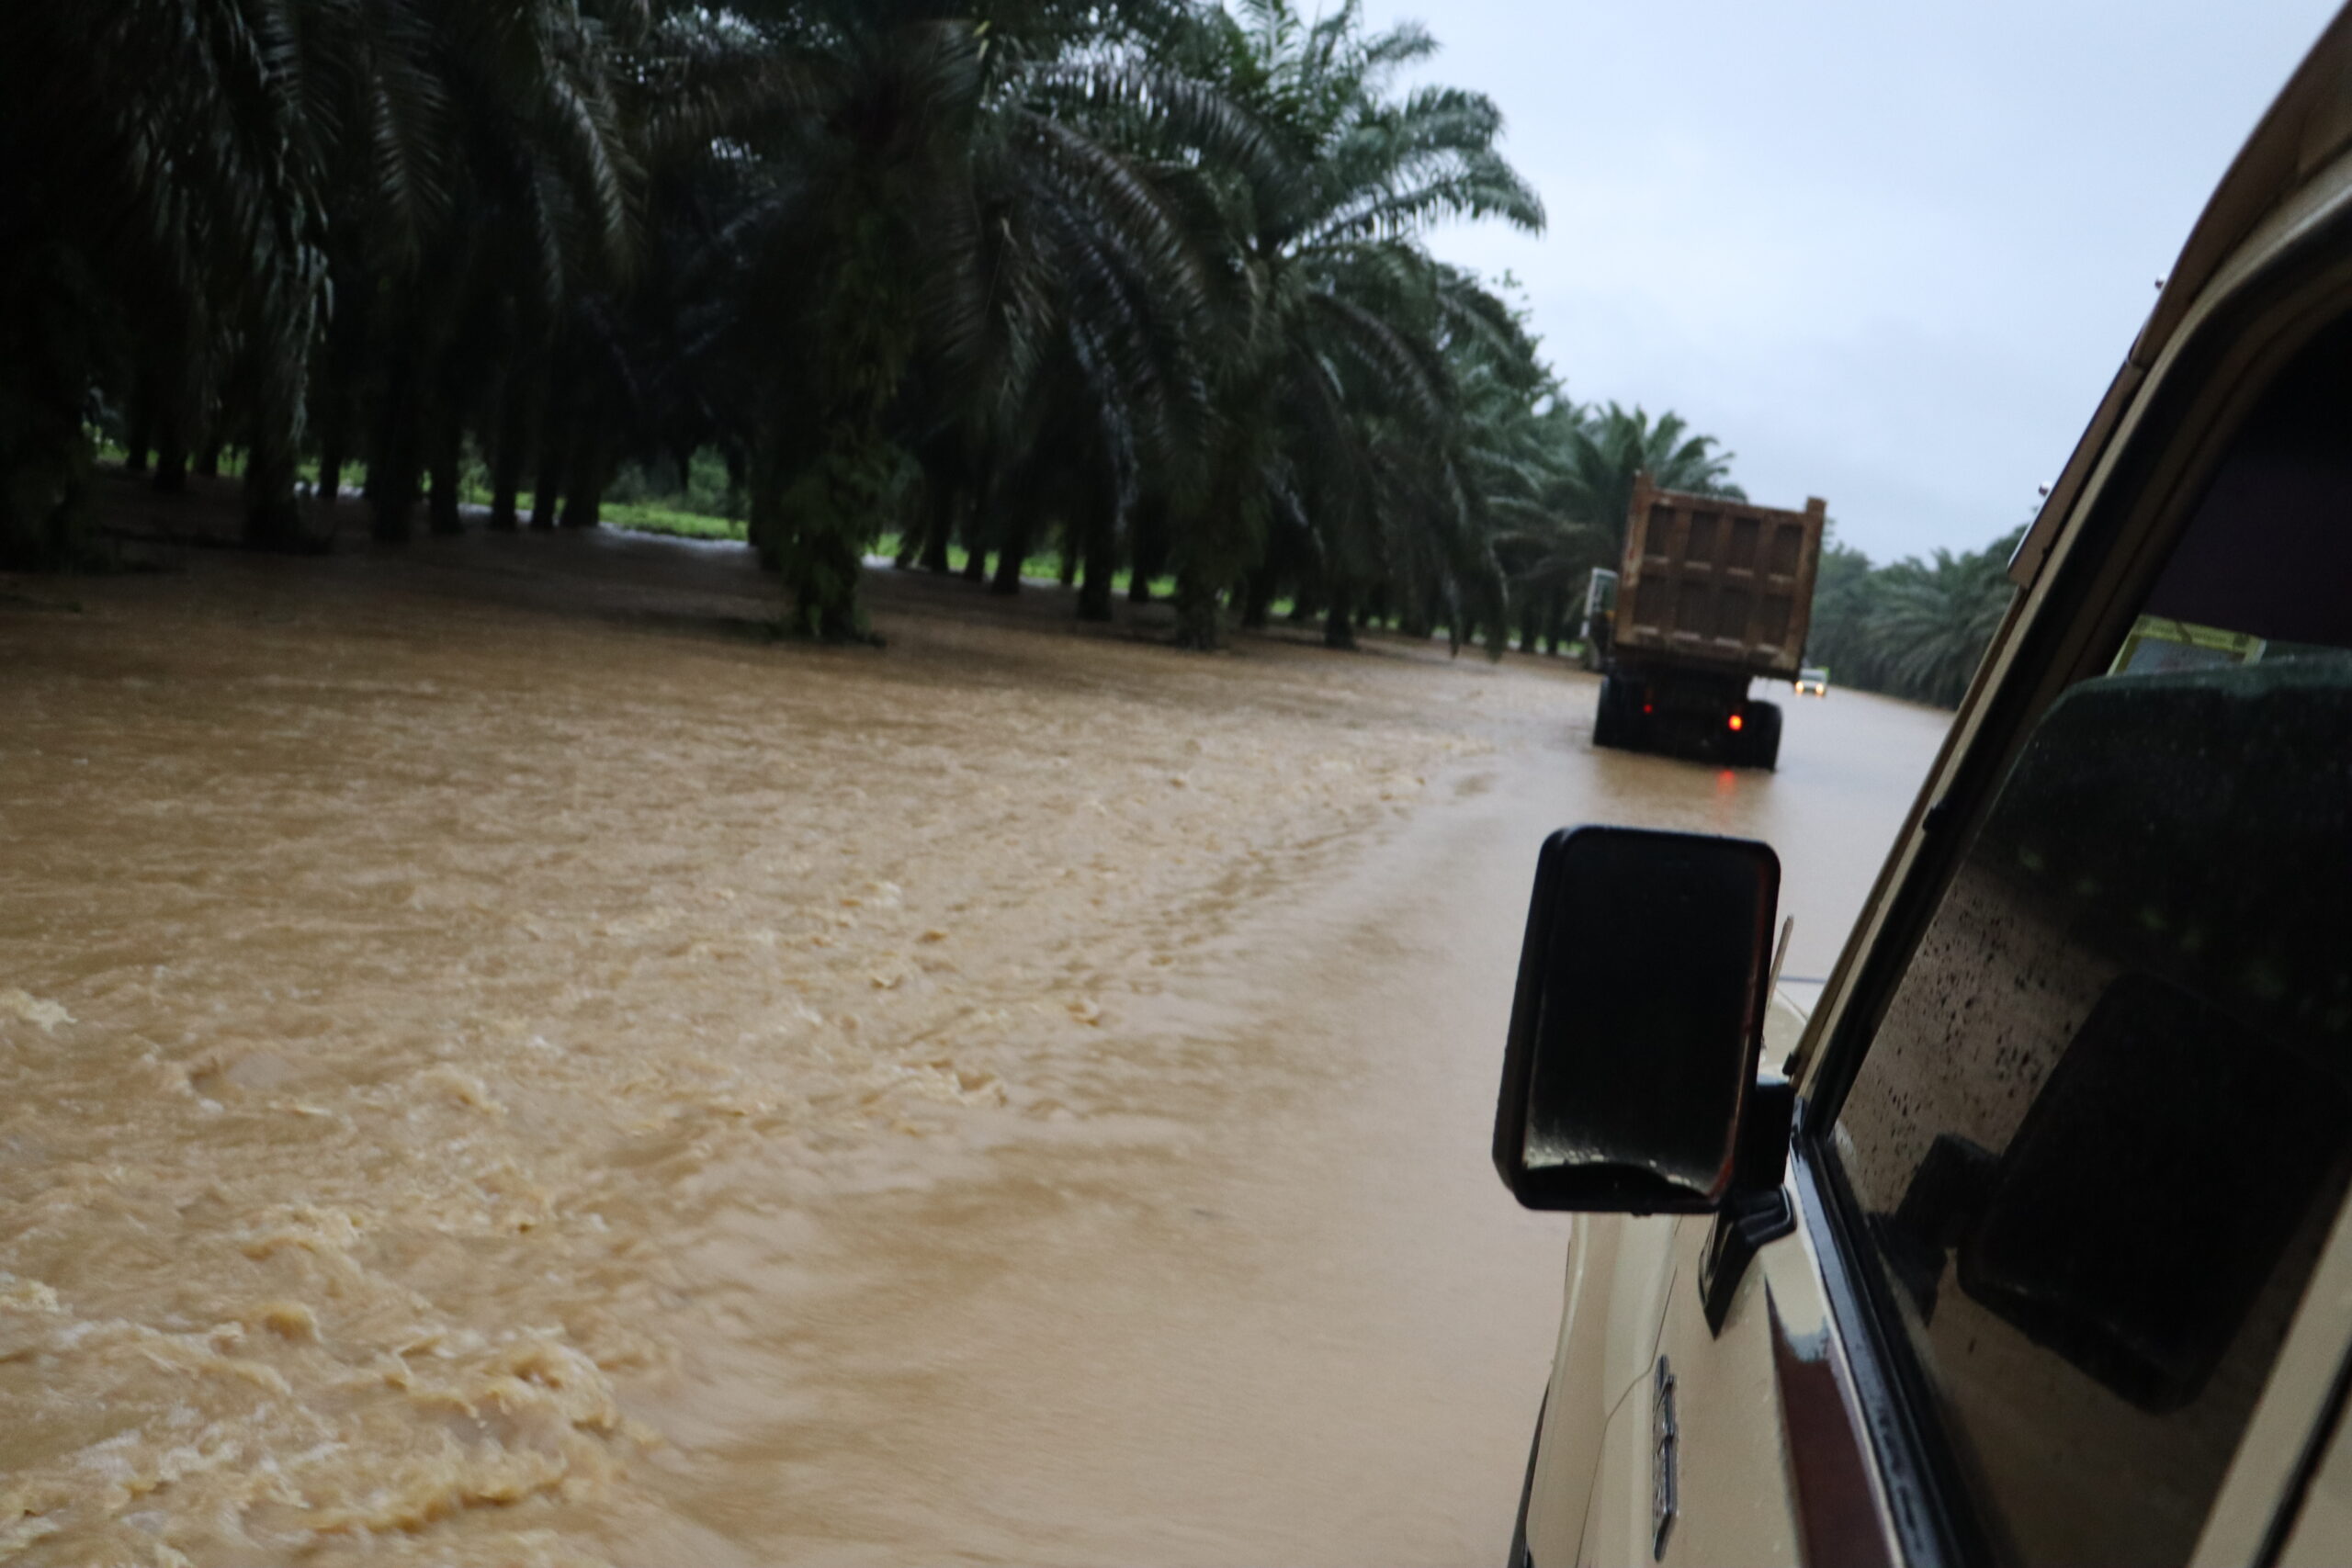 The roads towards the New Guinea forest flooded.